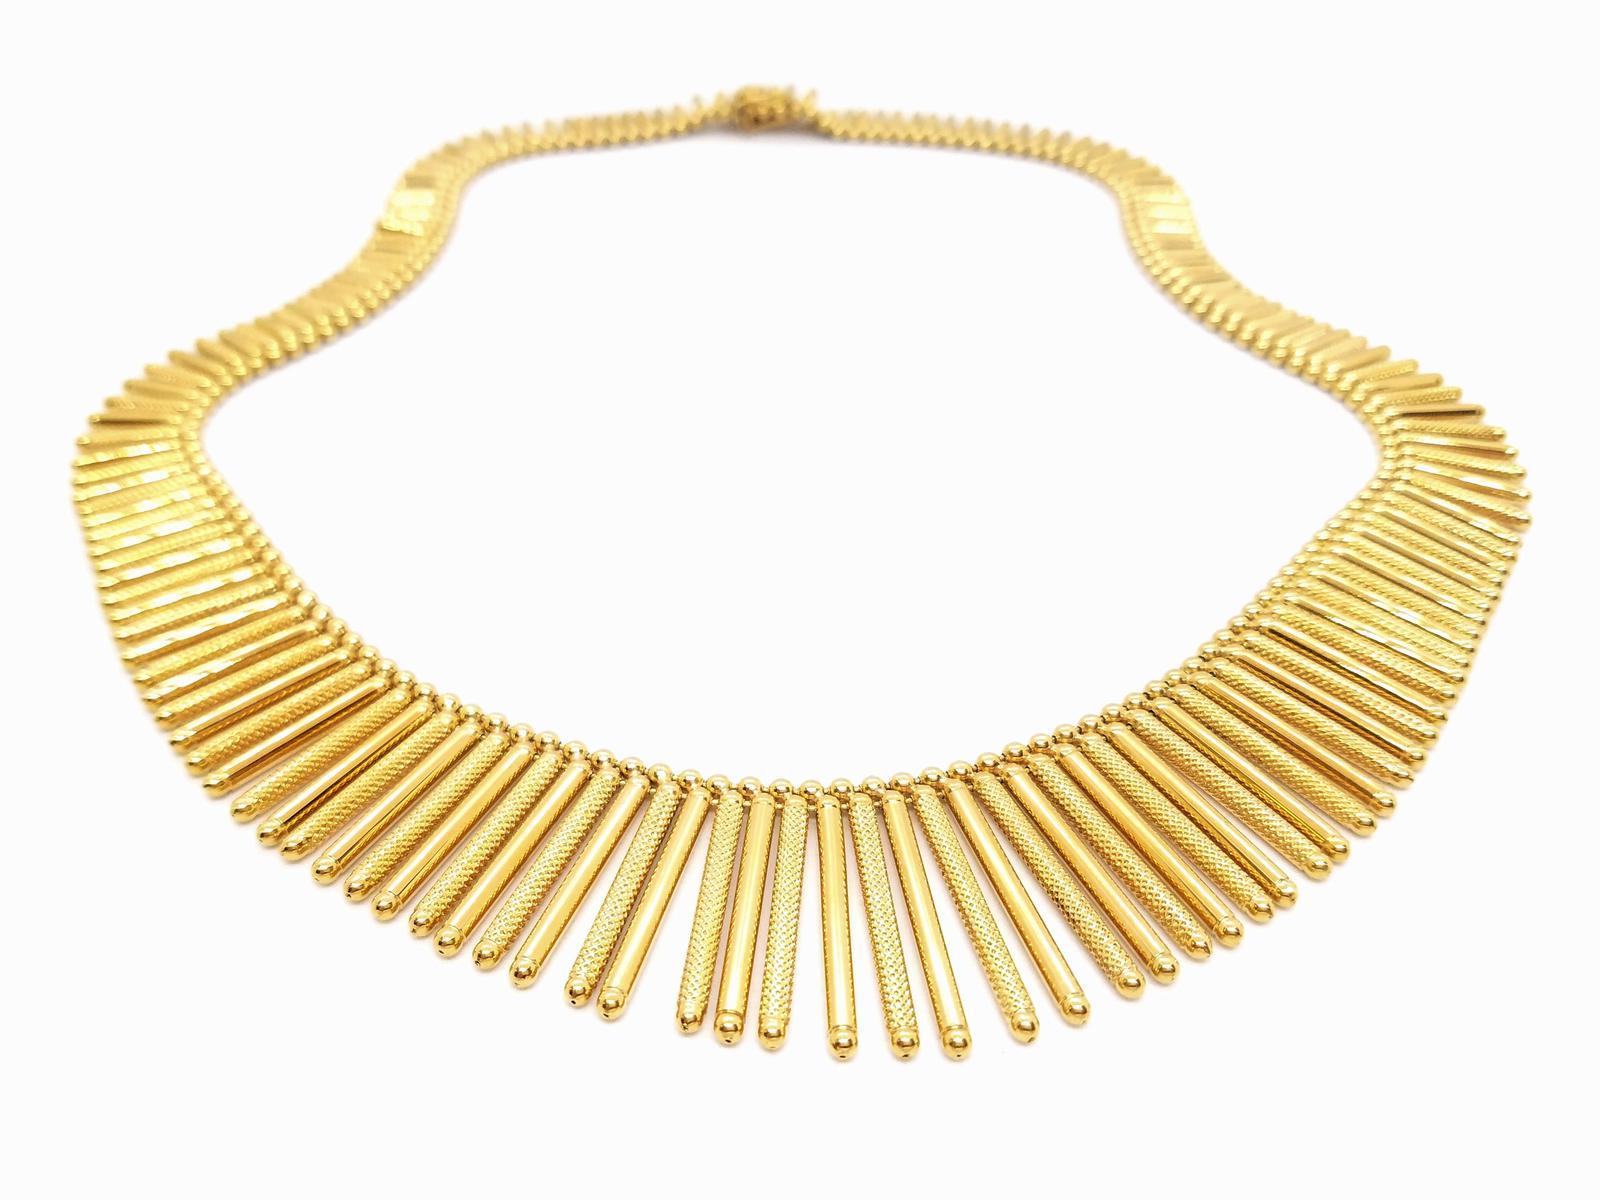 Beautiful necklace vintage golden yellow 750 mils (18 carats). mesh articulated joliement worked. falling. length: 45 cm. width front: 2.65 cm. width at the back: 1.03 cm. thickness: 0 . 22 cm. total weight: 57.91 g. clasp with eight safety.